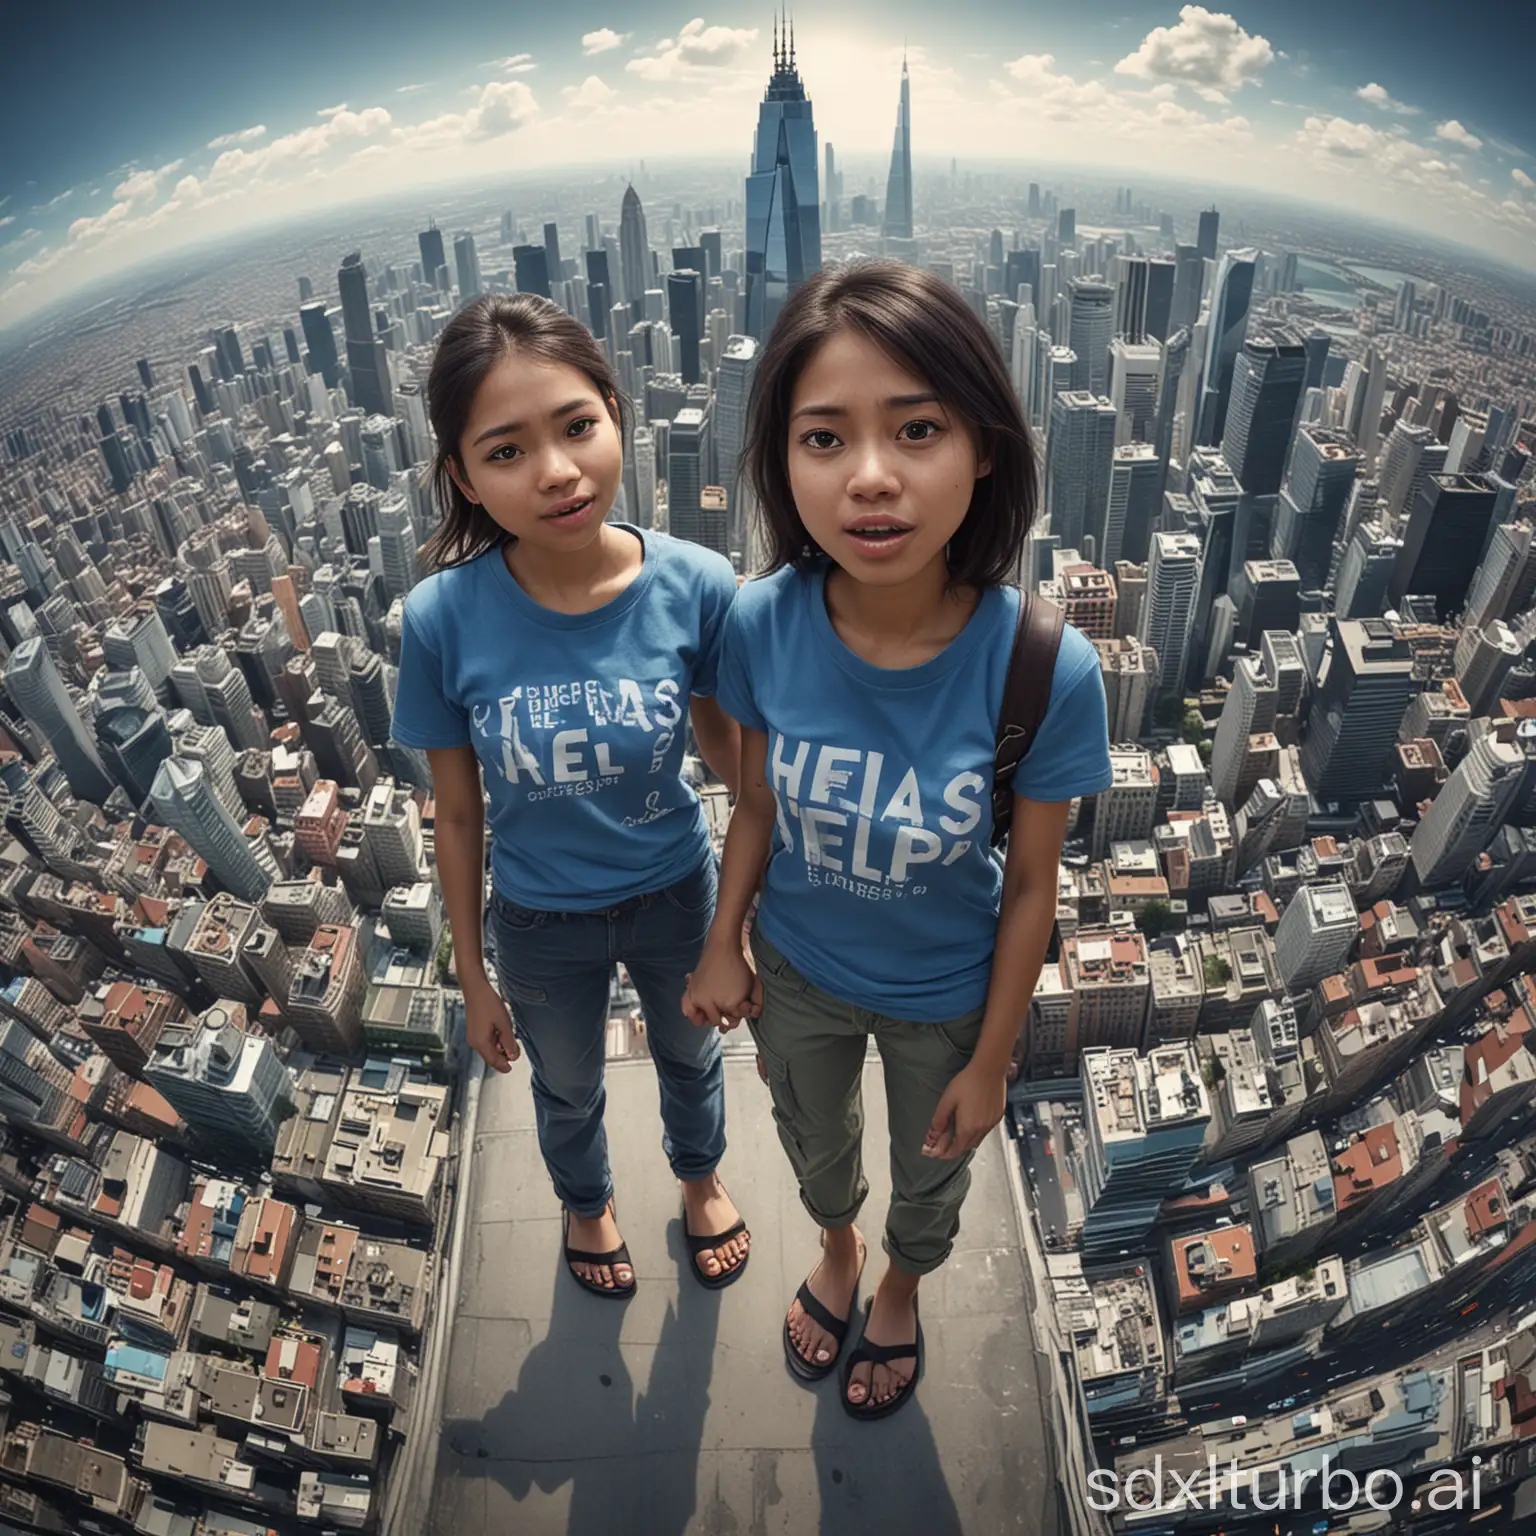 Created a hyperrealistic 4D caricature of a 25 year old Indonesian girl, mouth twisted in  puzzlement,wearing a blue shirt, cargo pants, flip flops, standing at the top of the tallest building while holding the hand of another person, the cameraman in front of him. next to it there is a chat bubble with the words ("PLEASE HELP"). Beautiful city background, fisheye lens